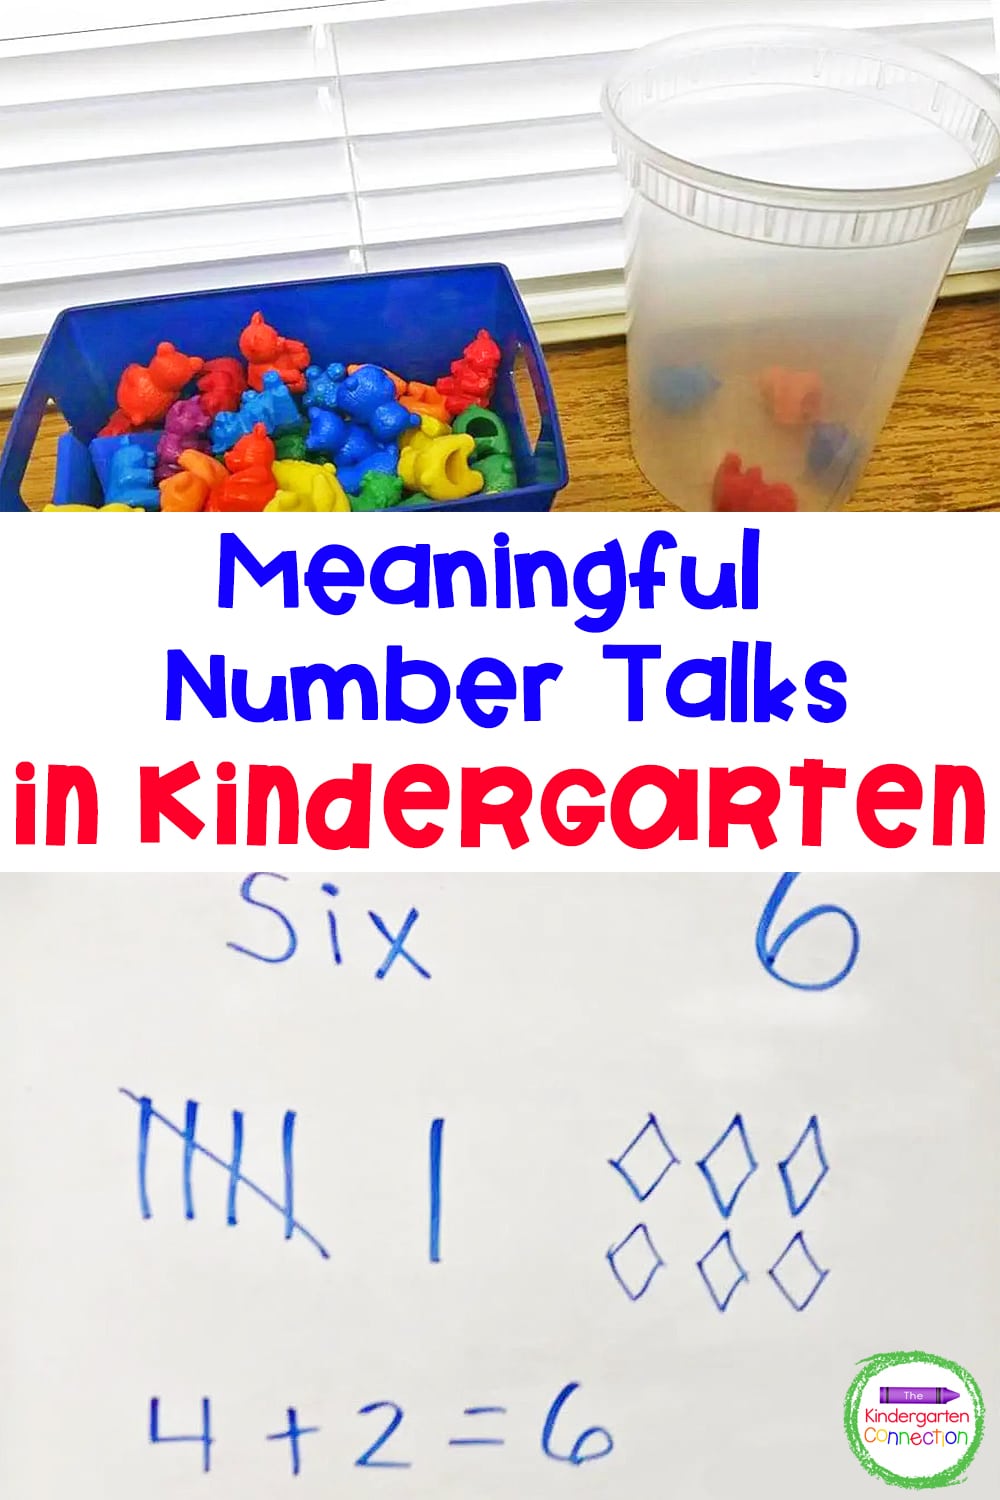 Try this fun and simple way to incorporate more number sense into your morning routine and have daily, meaningful number talks EVERY day!